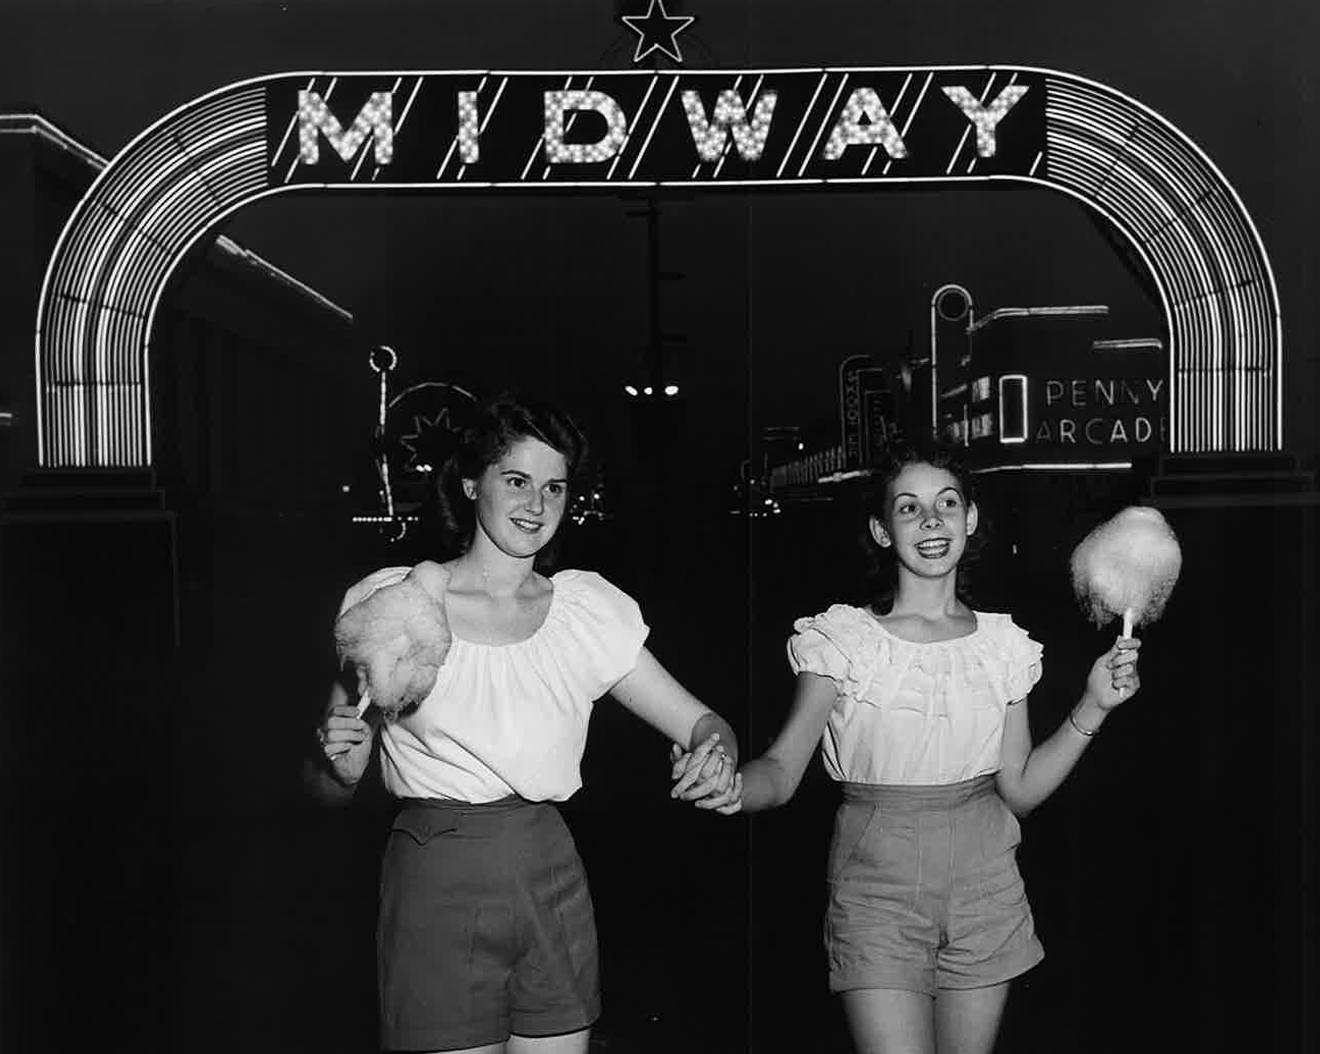 Come frolic with classic fair food on the Midway.